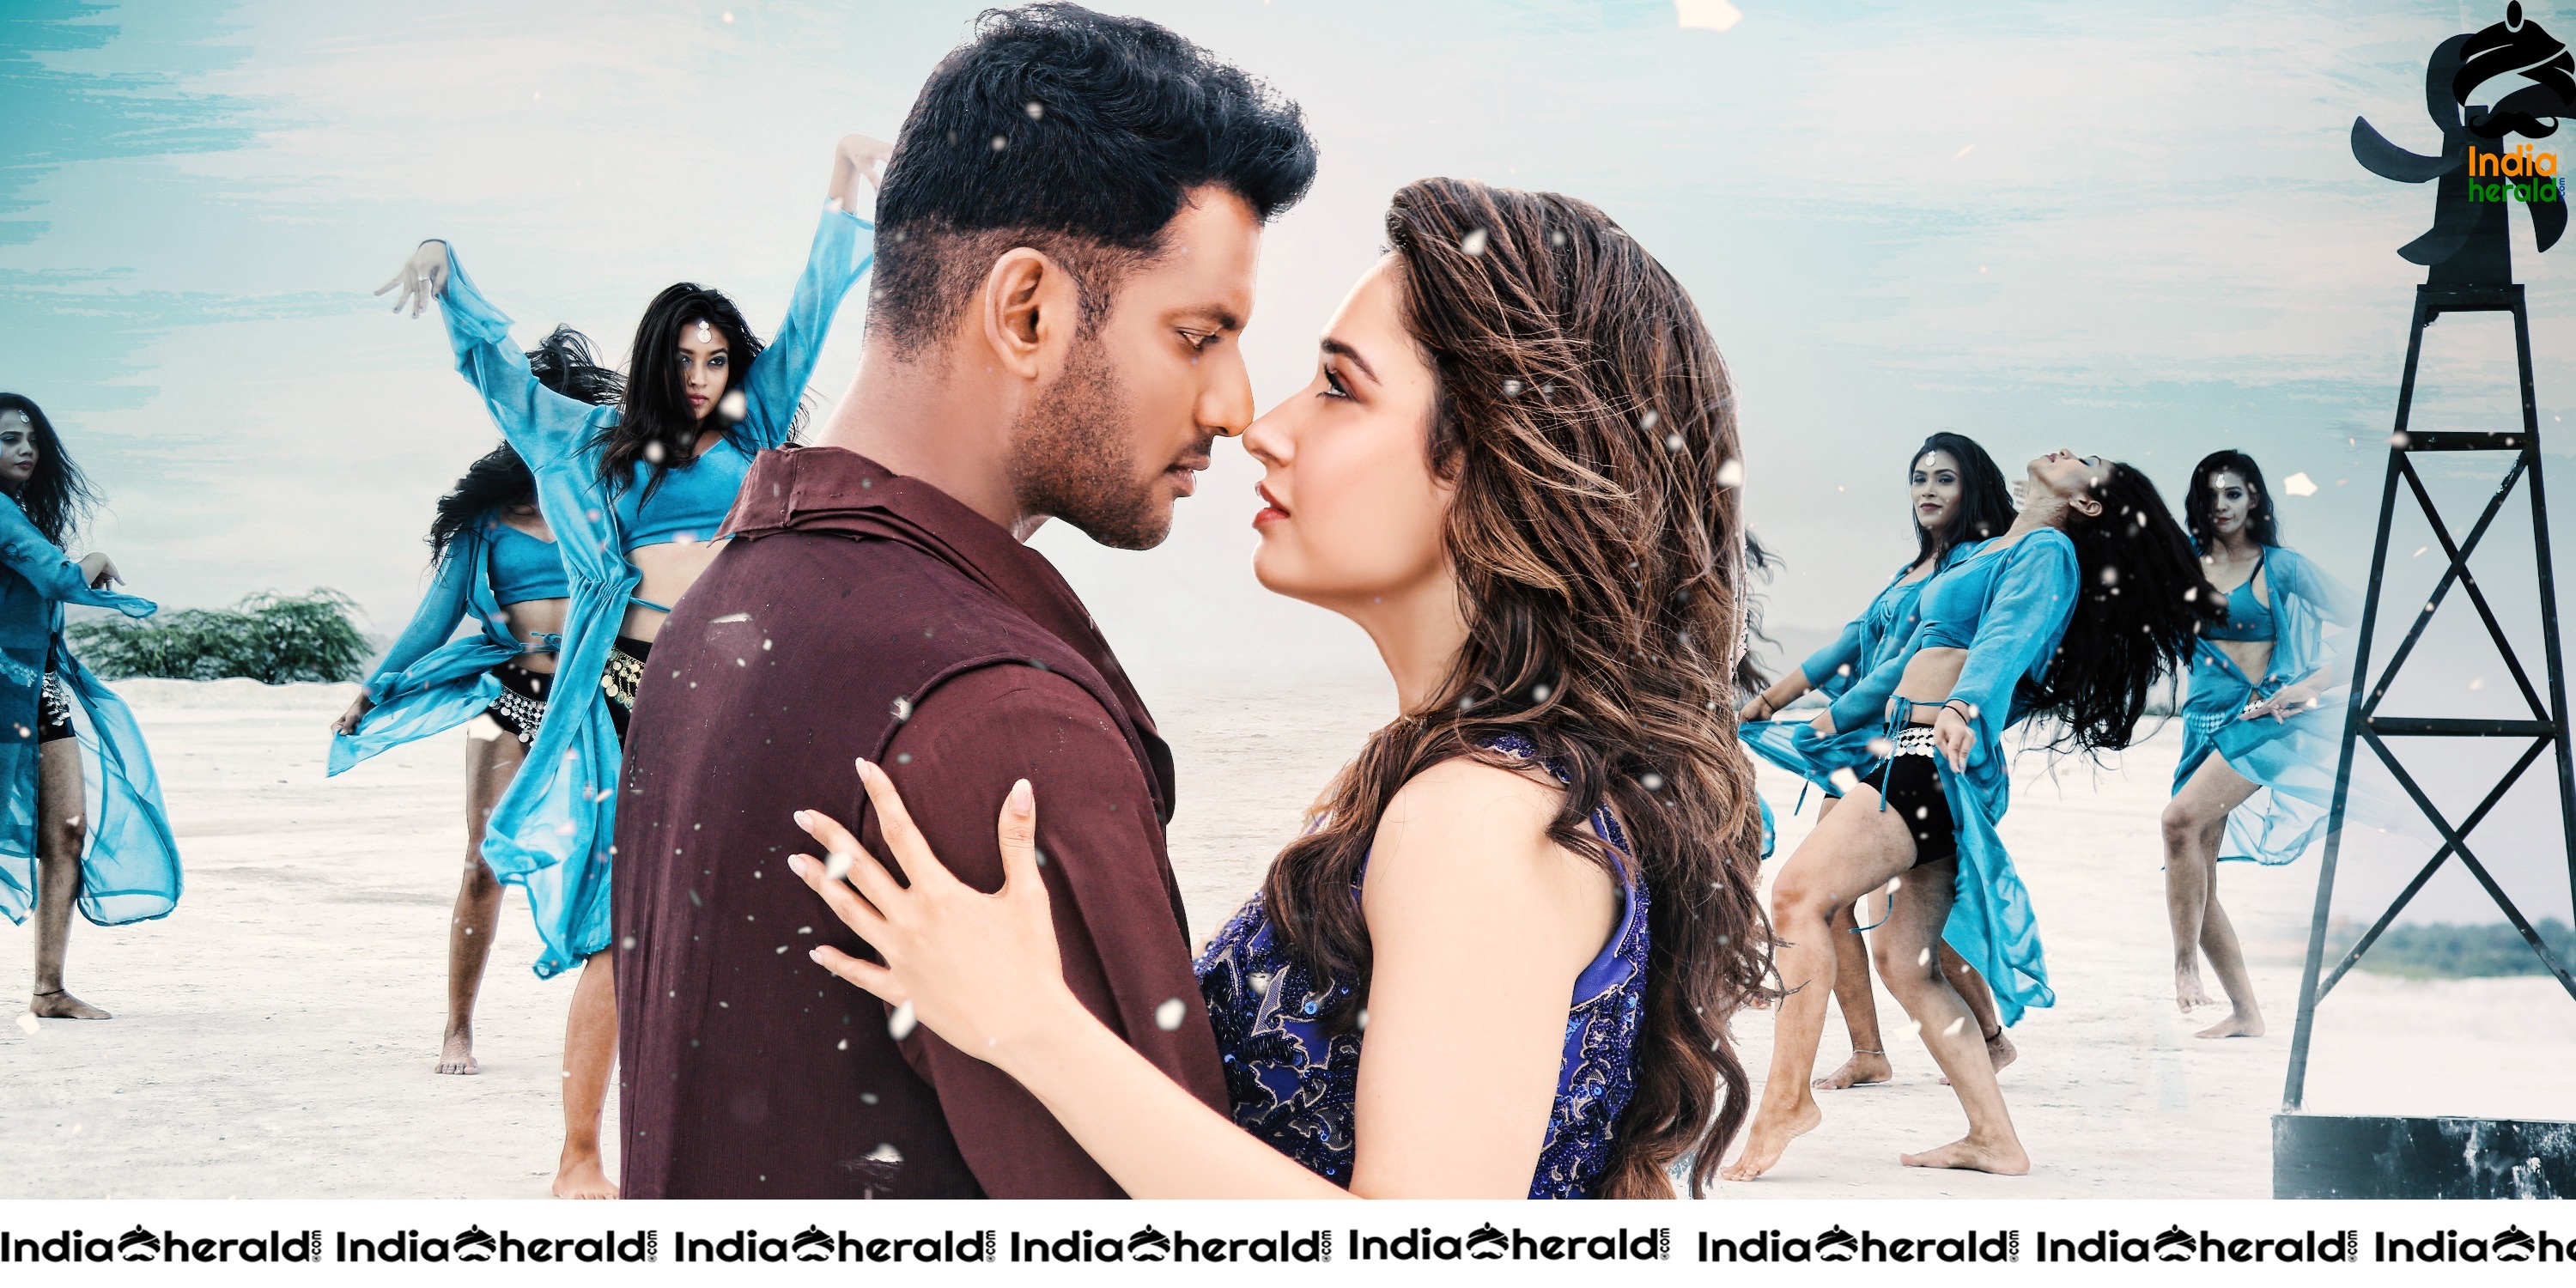 Action Movie Latest HD Telugu Poster and Still featuring Tamanna and Vishal